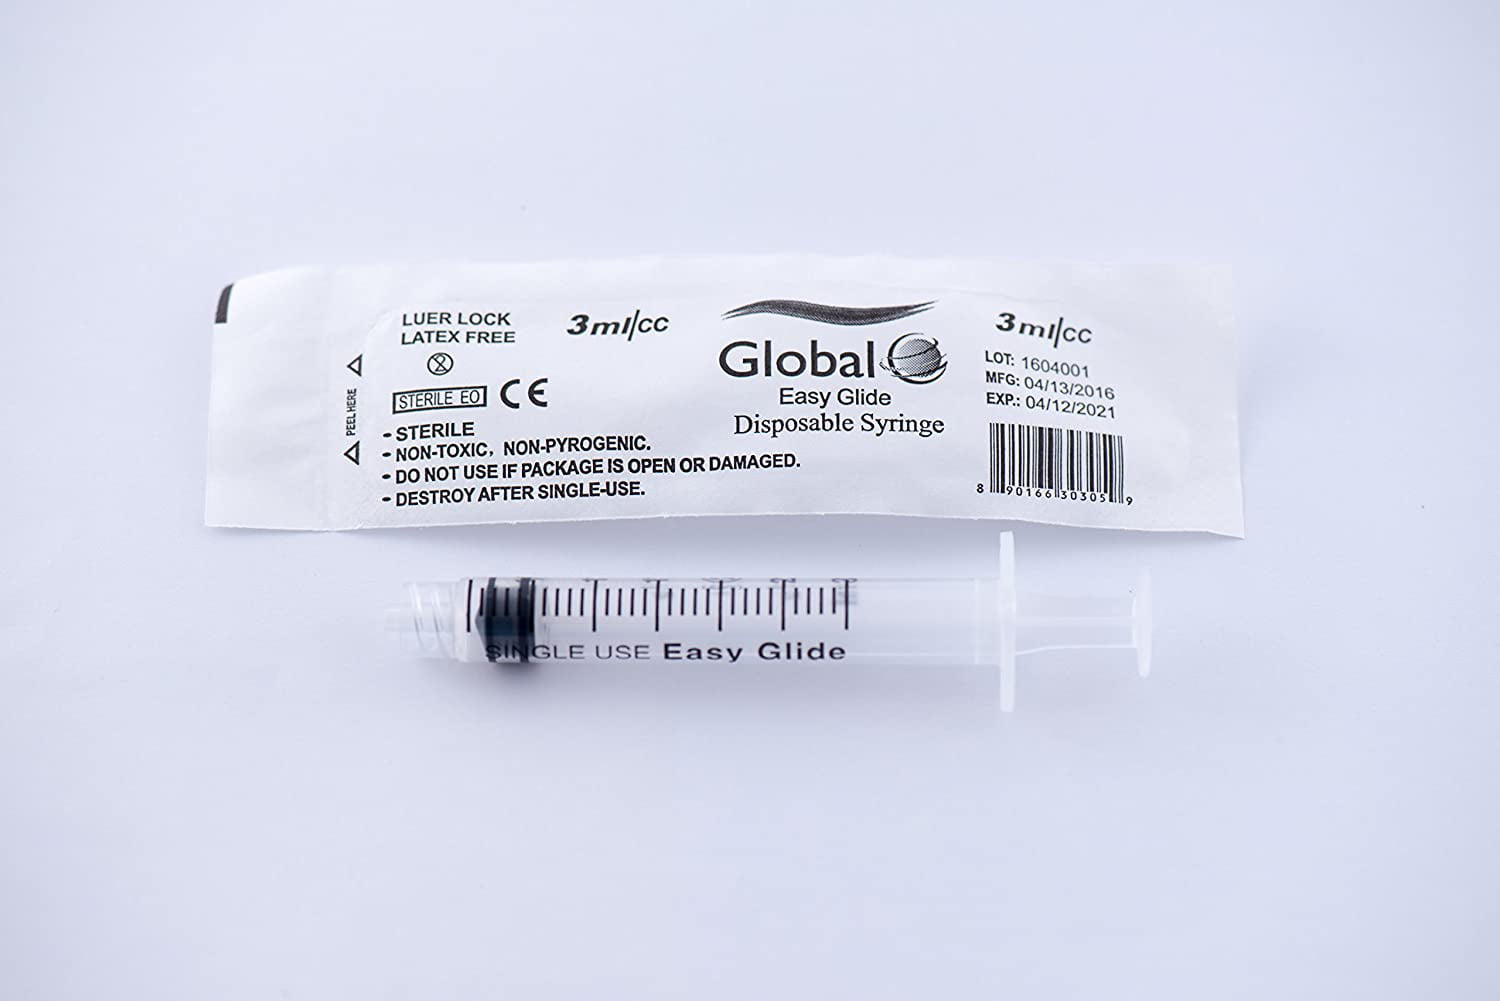 3CC Sterile Syringe Only with Luer Lock Tip - 50 Syringes Without a Needle  by Easy Glide - Great for Medicine, Feeding Tubes, and Home Care 